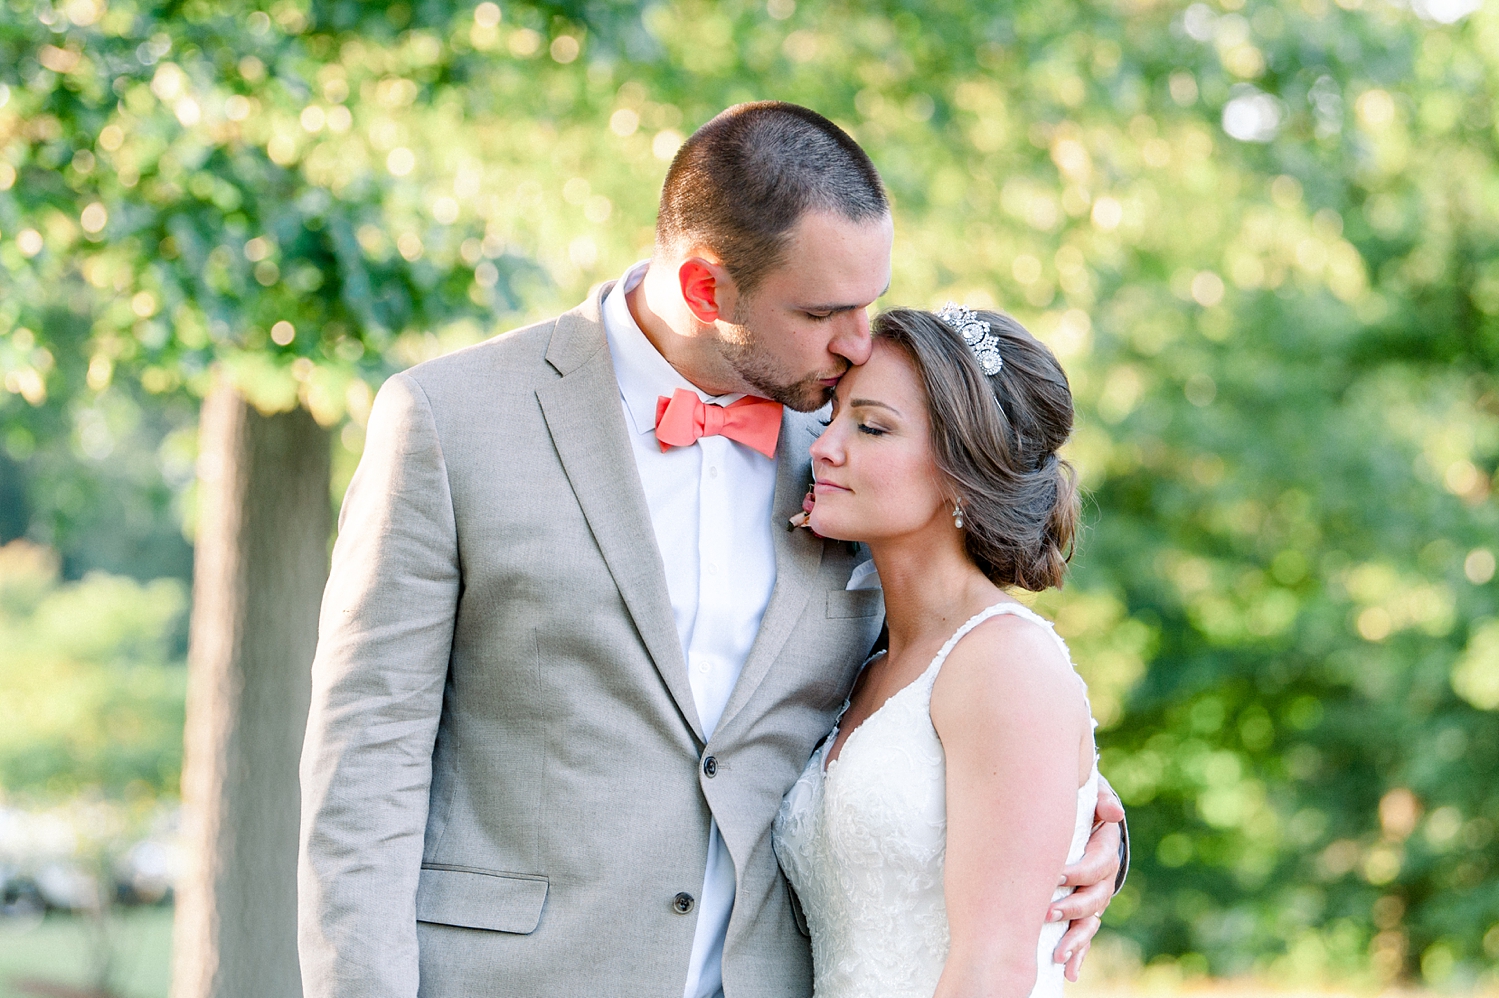 Romantic Garden Themed, Peach and Coral Summertime Wedding by Erika Christine Photography